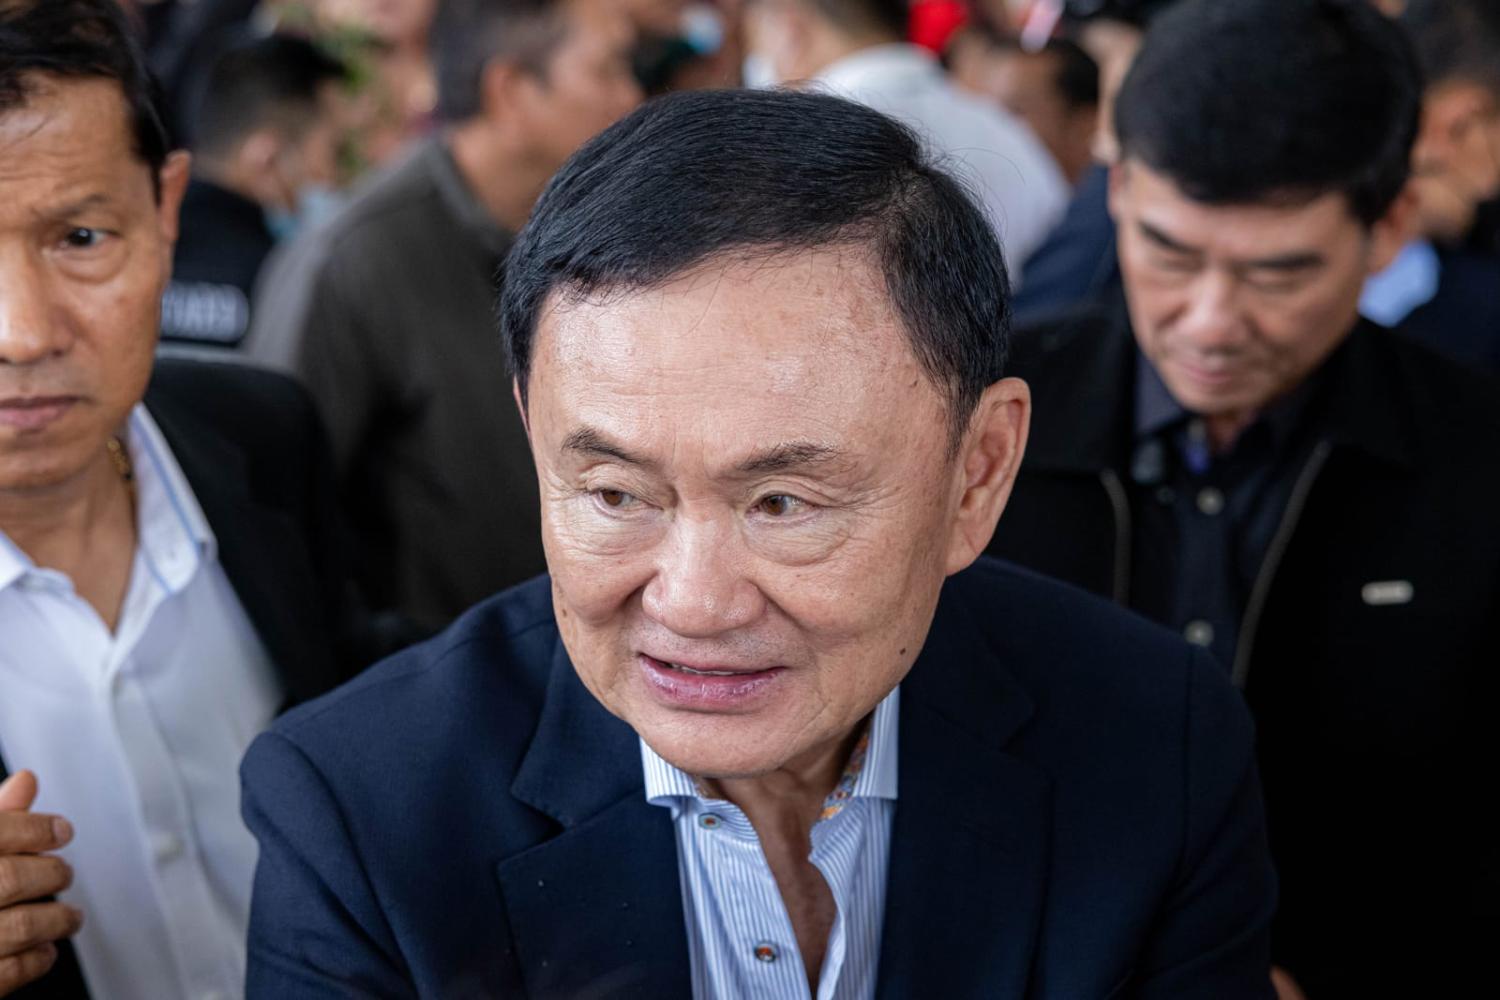 Thaksin Shinawatra, Thailand's former prime minister, at the Pheu Thai party headquarters in Bangkok, Thailand, in March (Andre Malerba/Bloomberg via Getty Images)